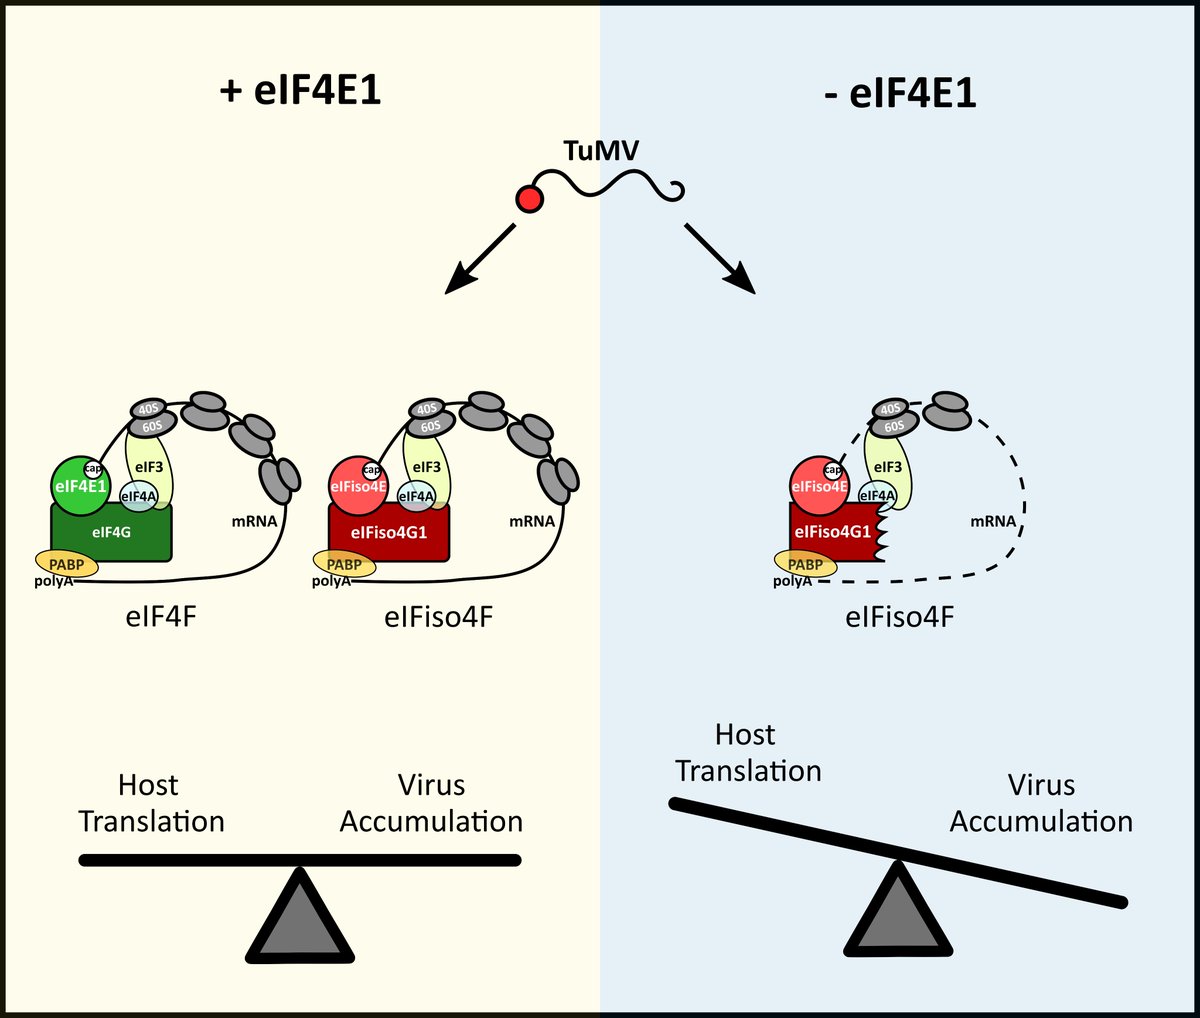 Check out our latest study in @PLOSPathogens where we explore hidden strategies for the subversion of host translation by the potyvirus TuMV in Arabidopsis. journals.plos.org/plospathogens/…